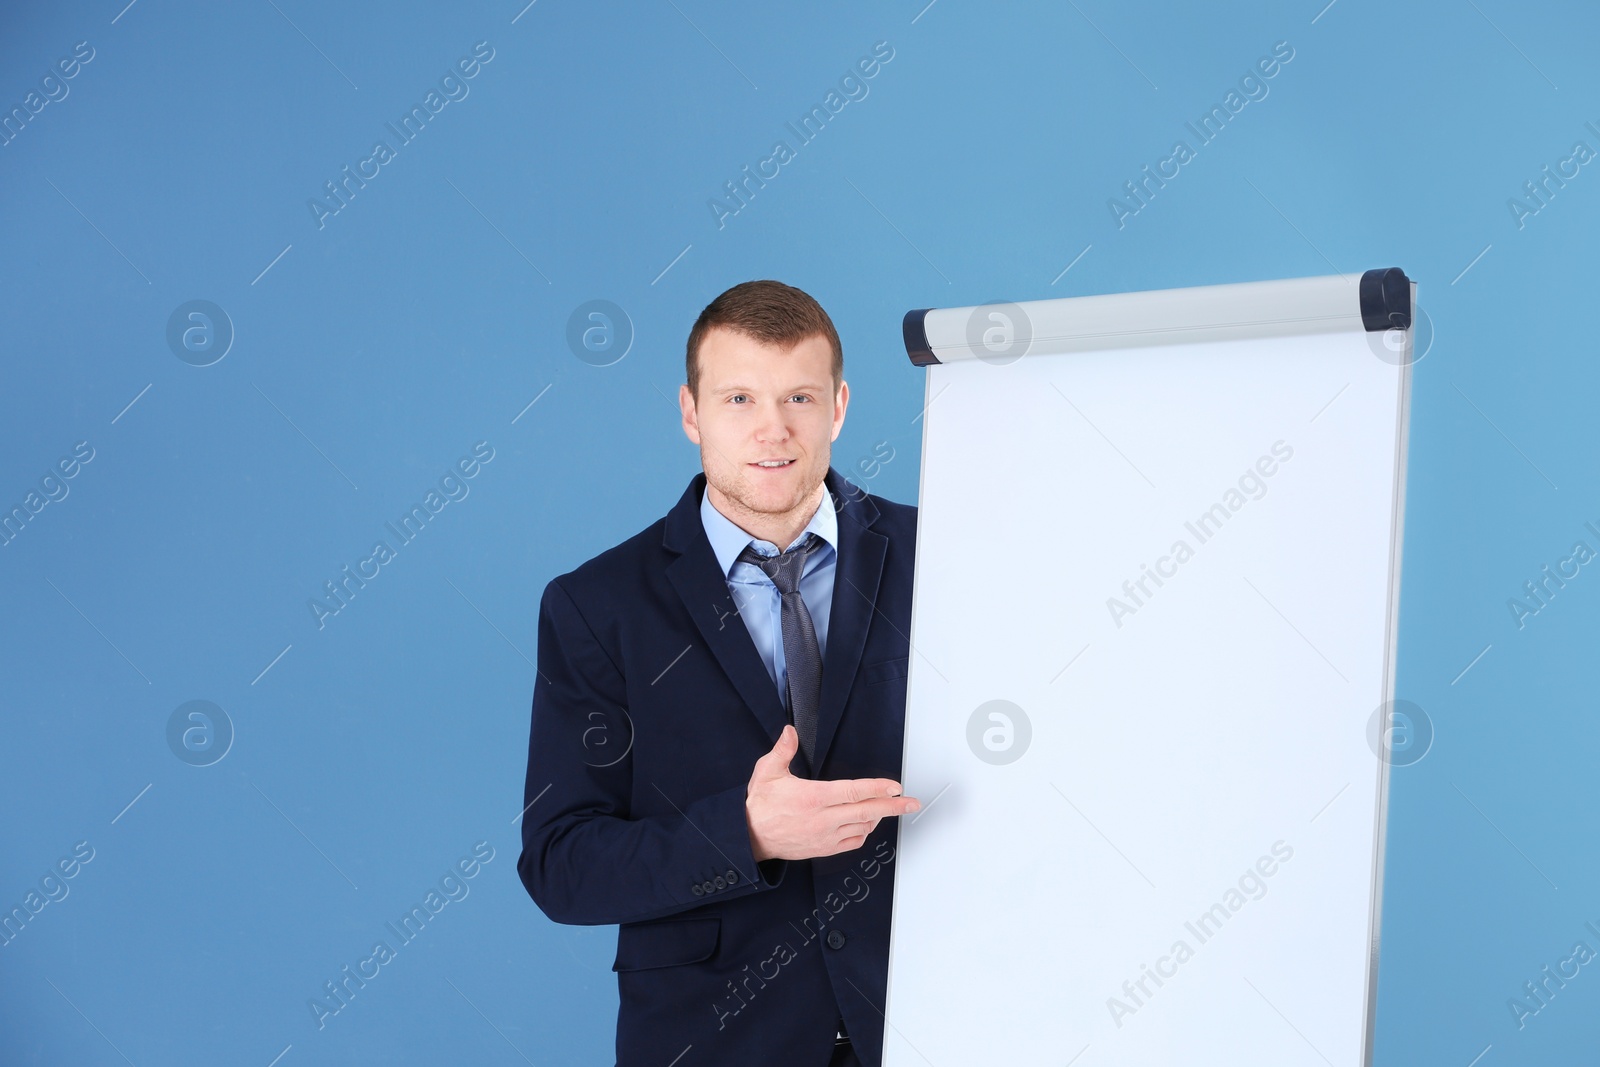 Photo of Business trainer giving presentation on flip chart board against color background